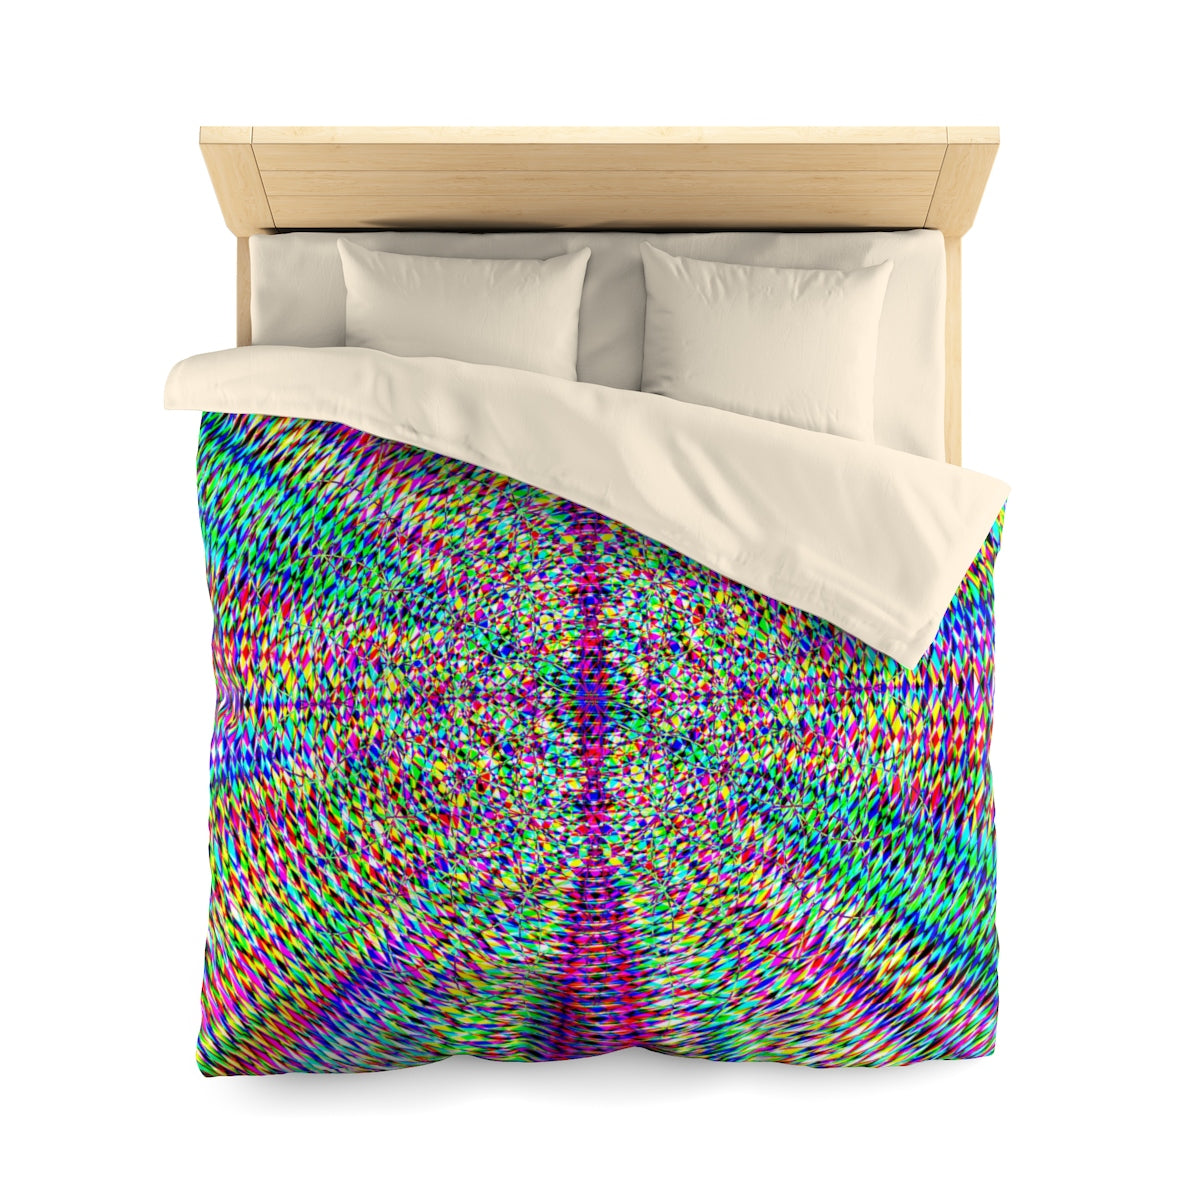 Seed Of Life . Duvet Cover . Queen